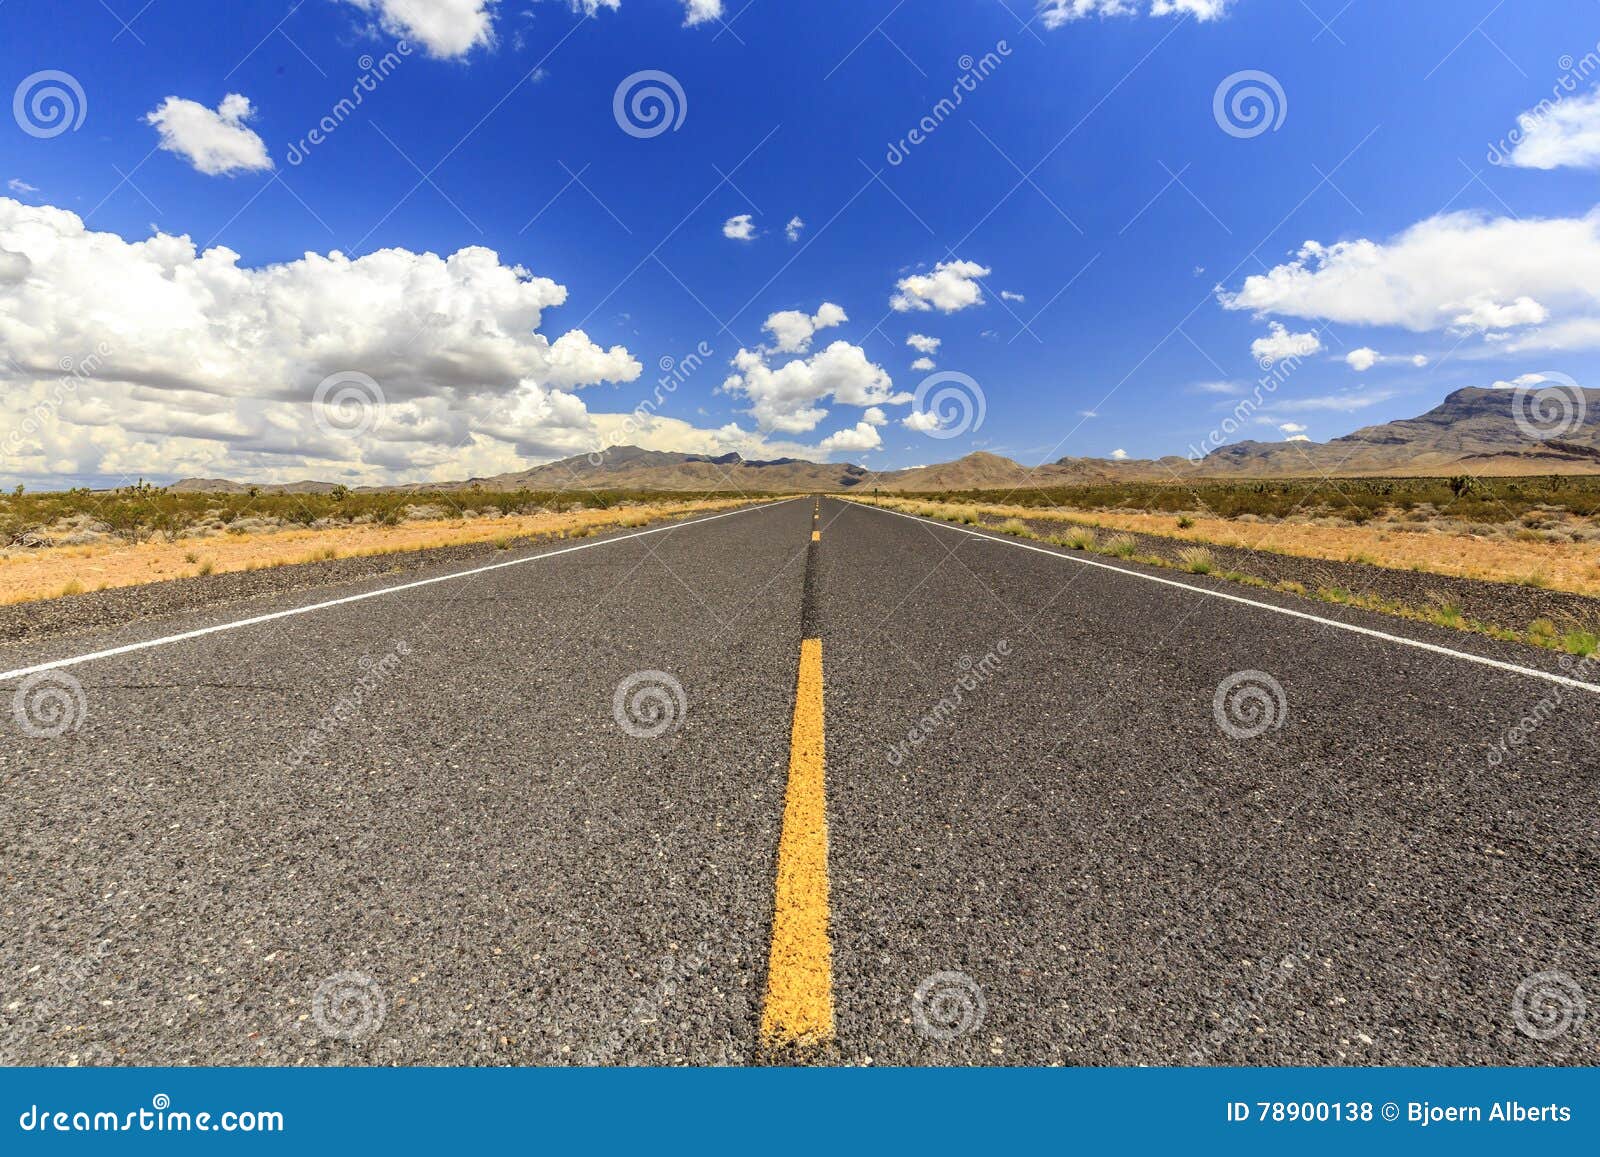 Endless Highway 91 NearLittlefield Stock Photo - Image of color